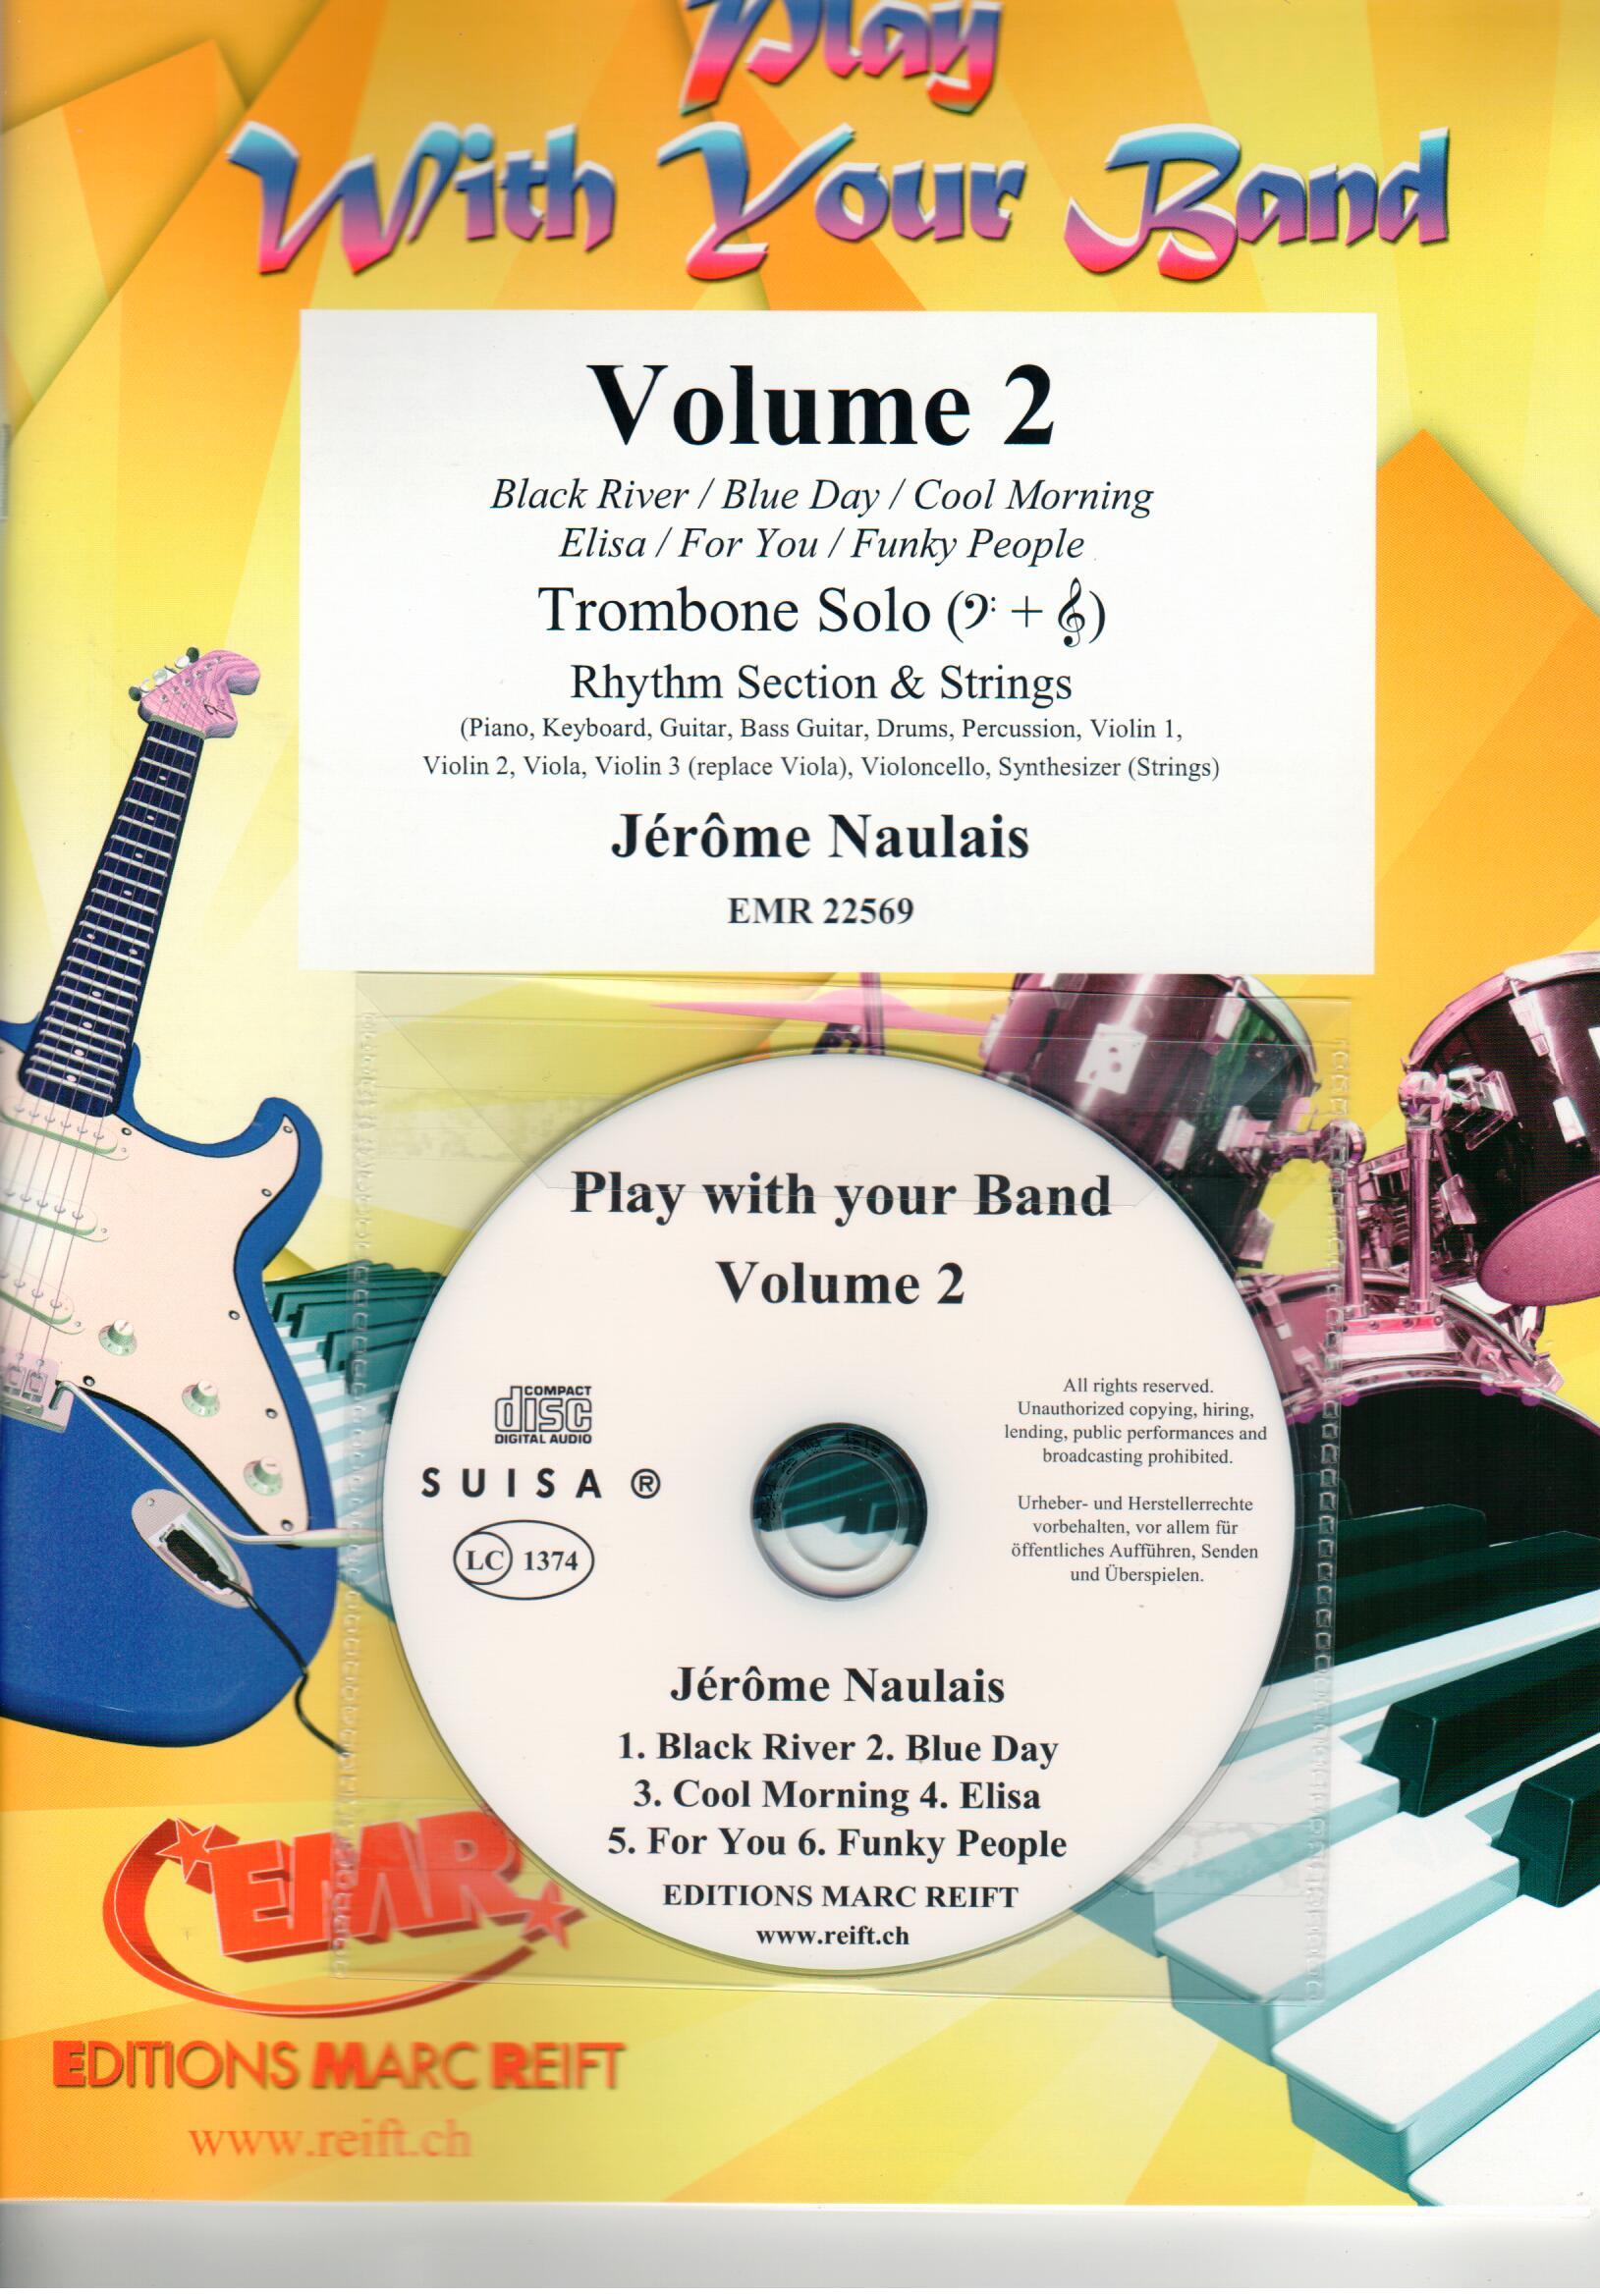 PLAY WITH YOUR BAND VOLUME 2